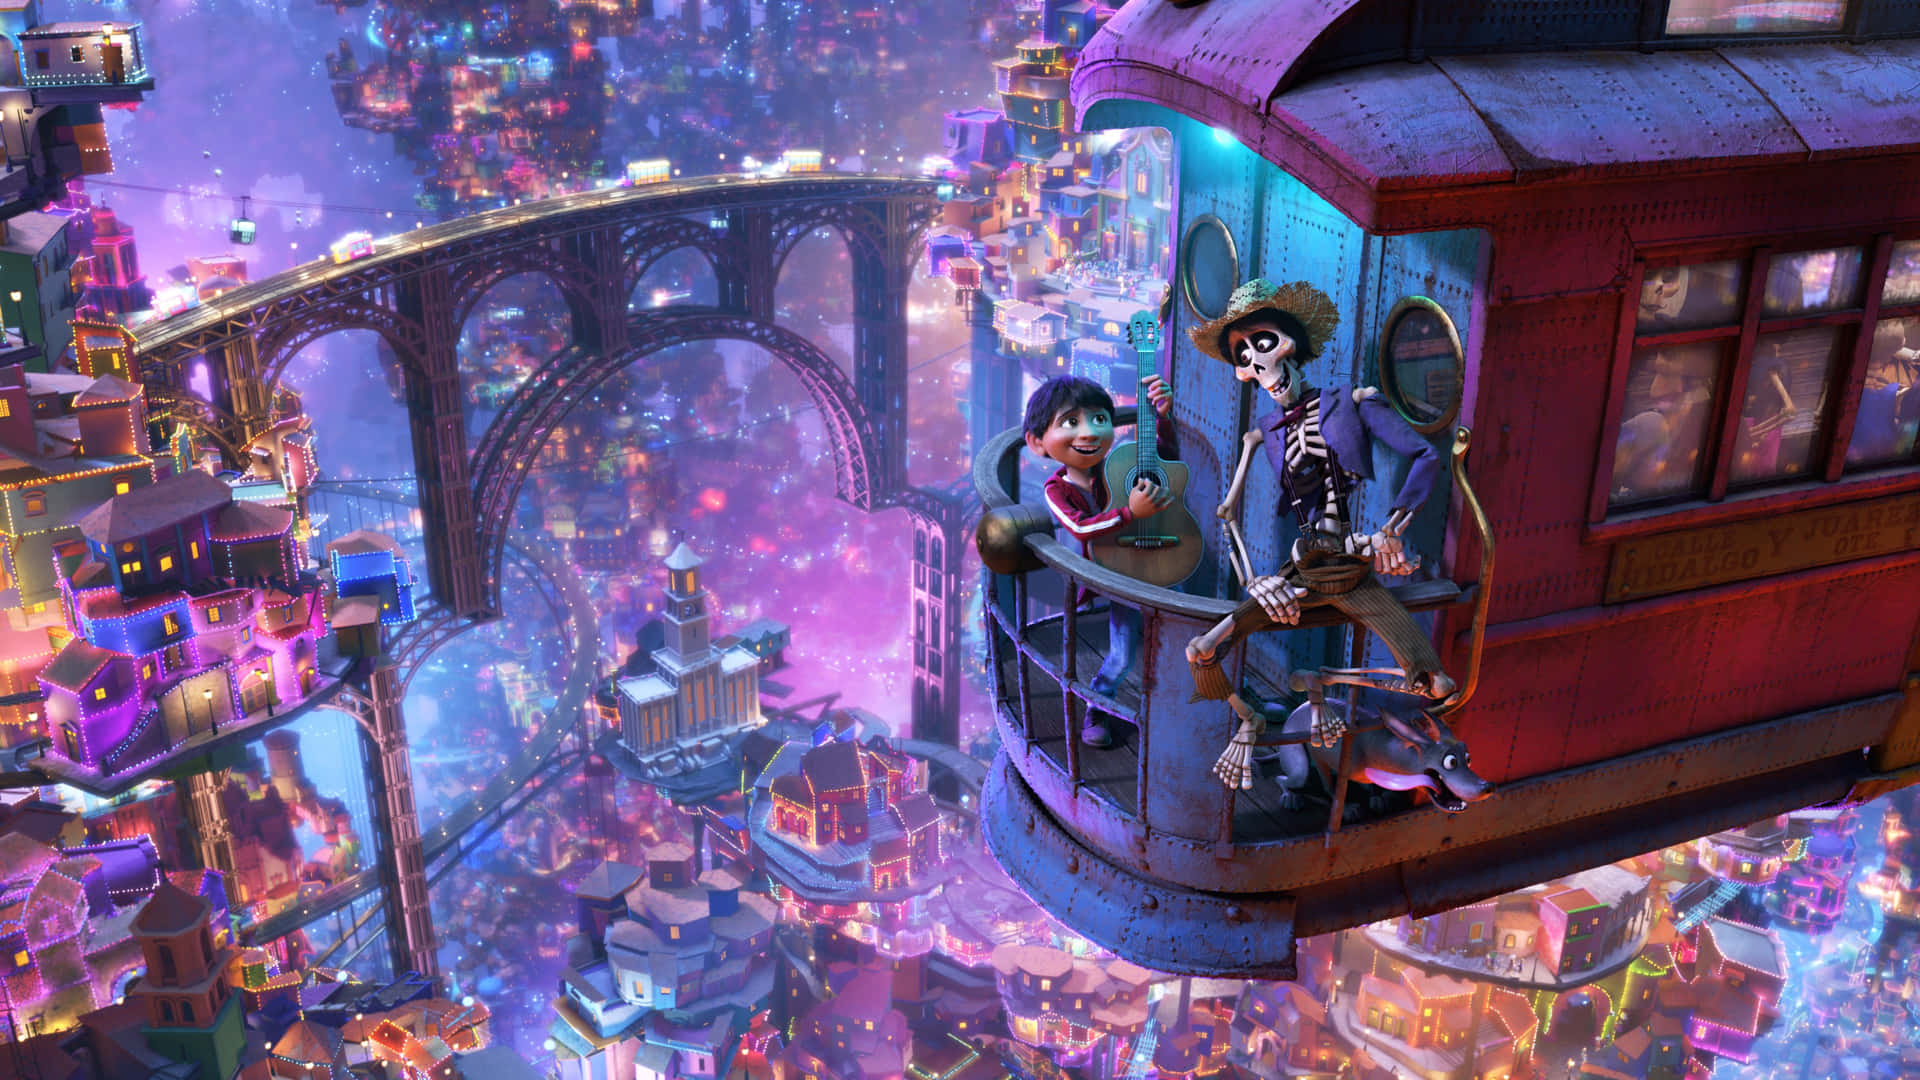 Disney Pixar's Coco is inspiring generations with its magical story Wallpaper